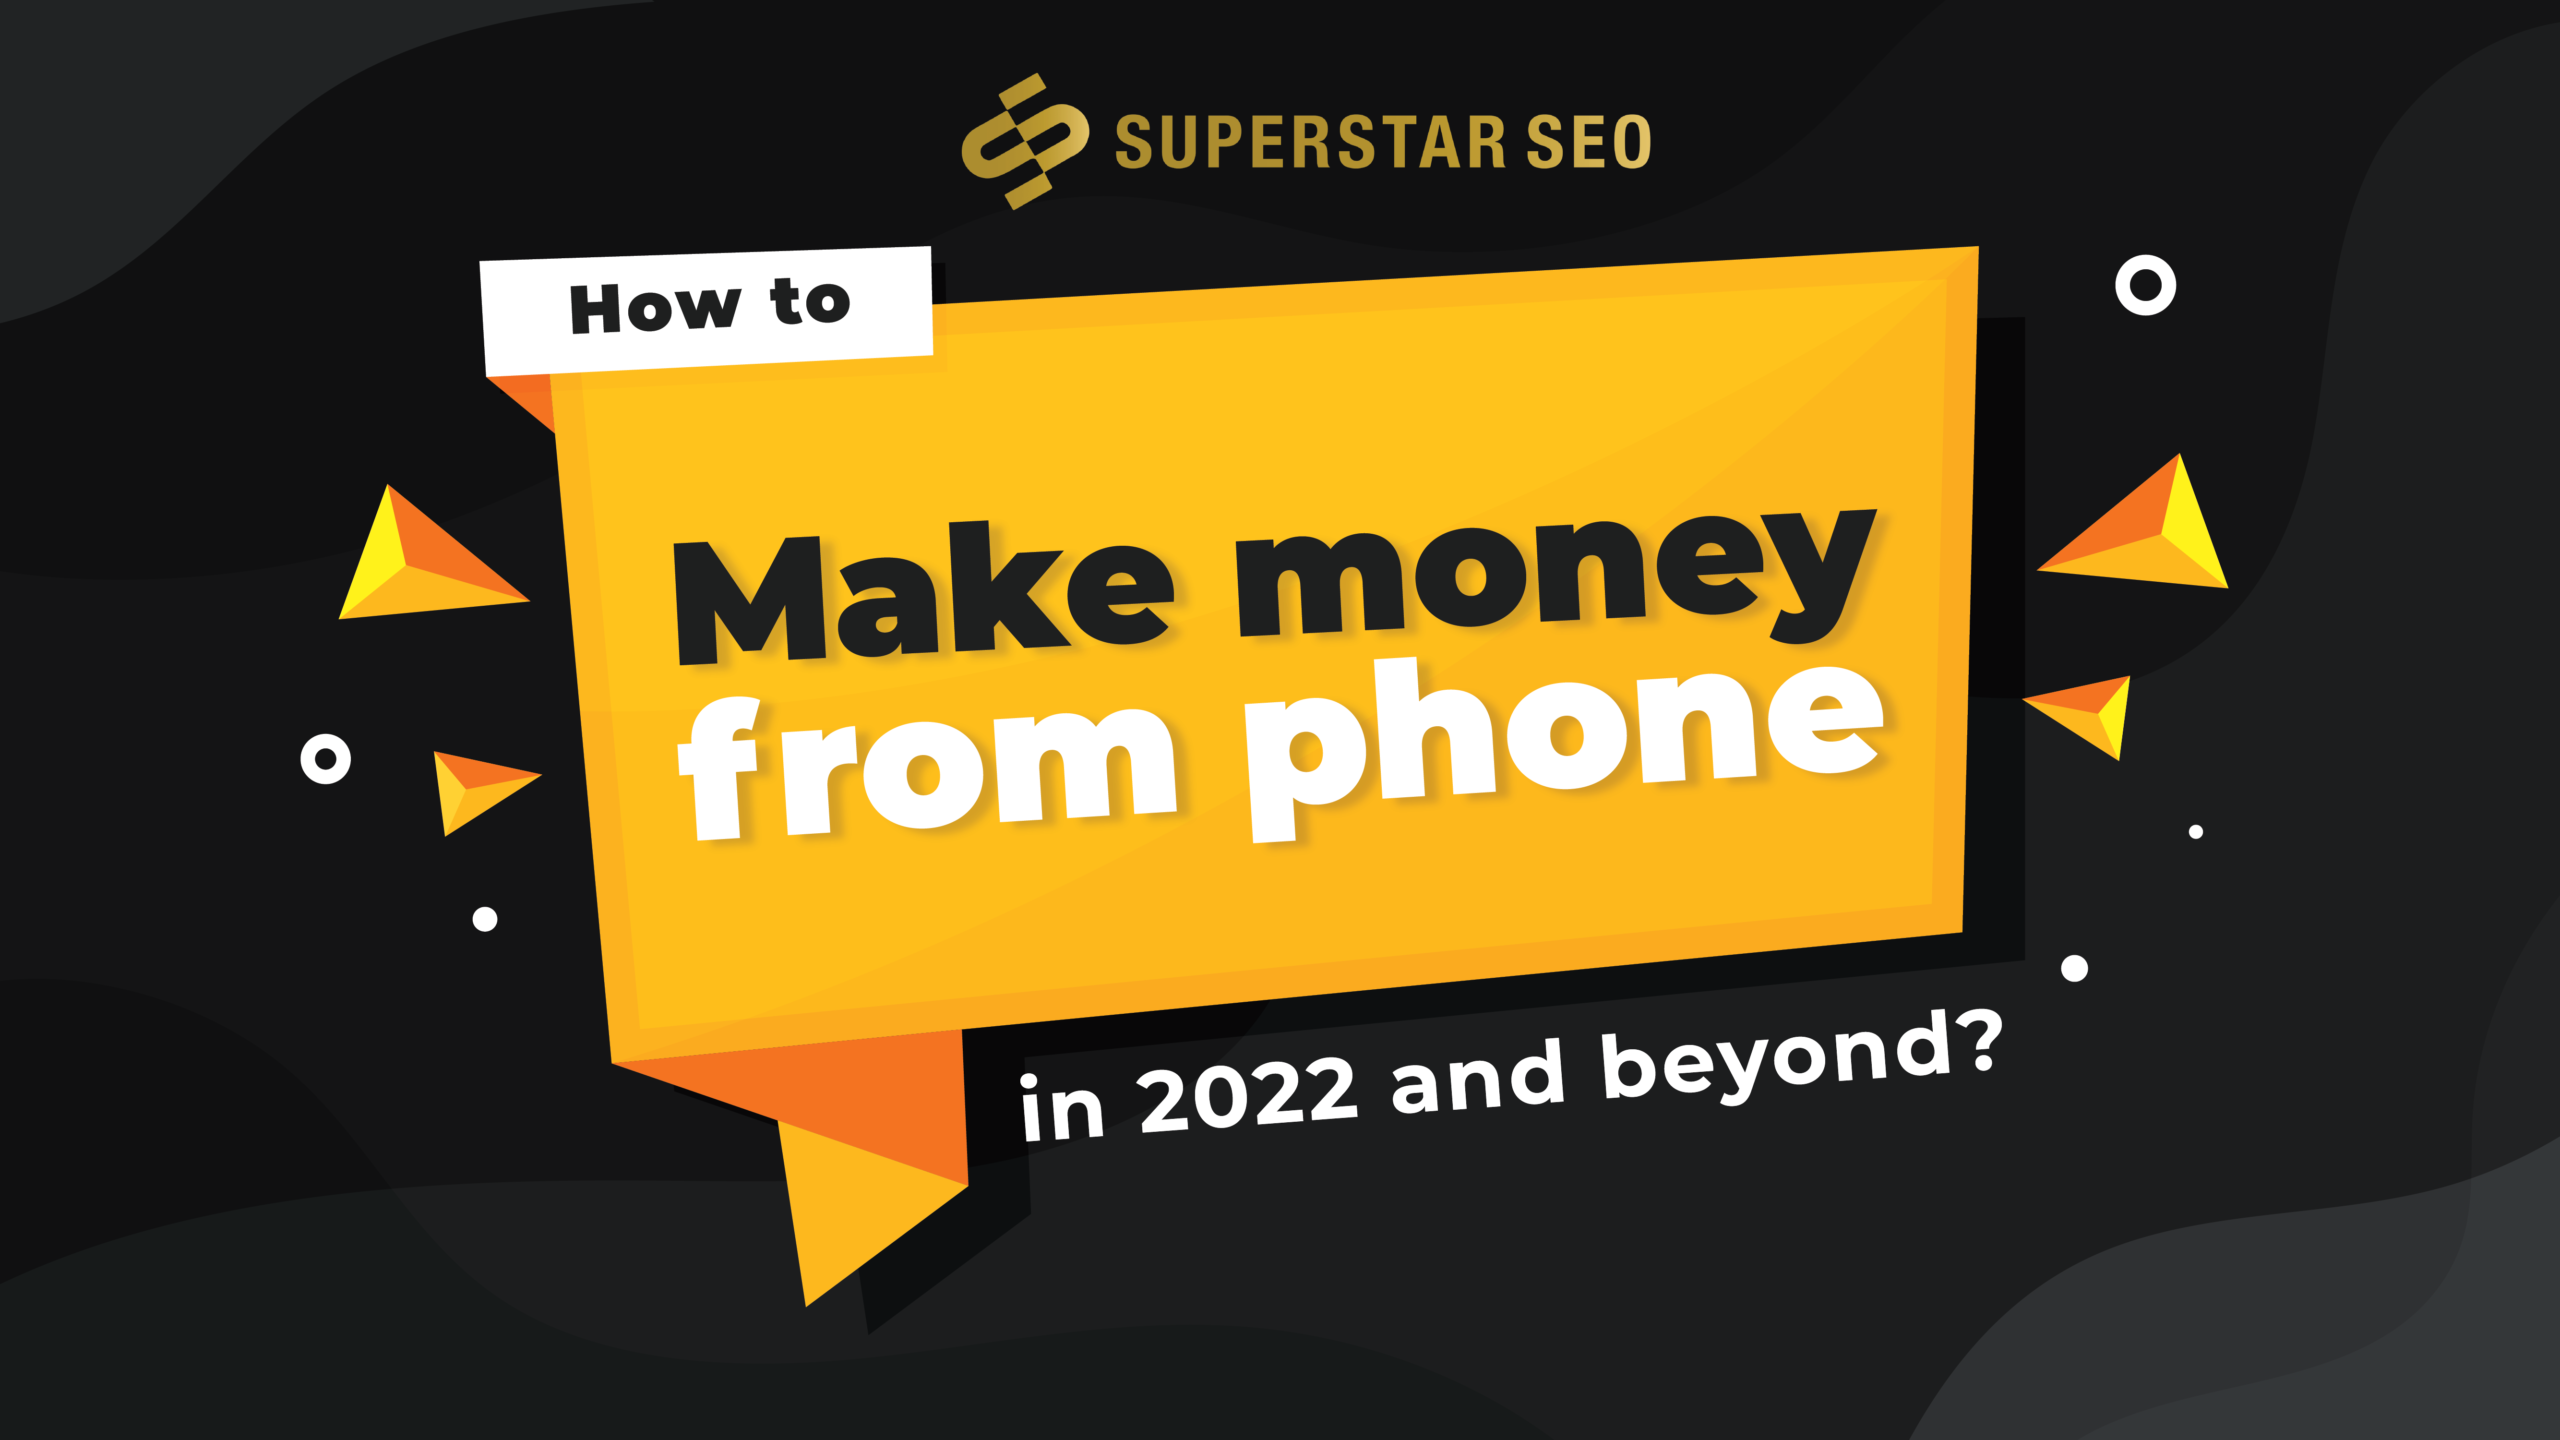 How-to-make-money-from-phone-in-2022-and-beyond